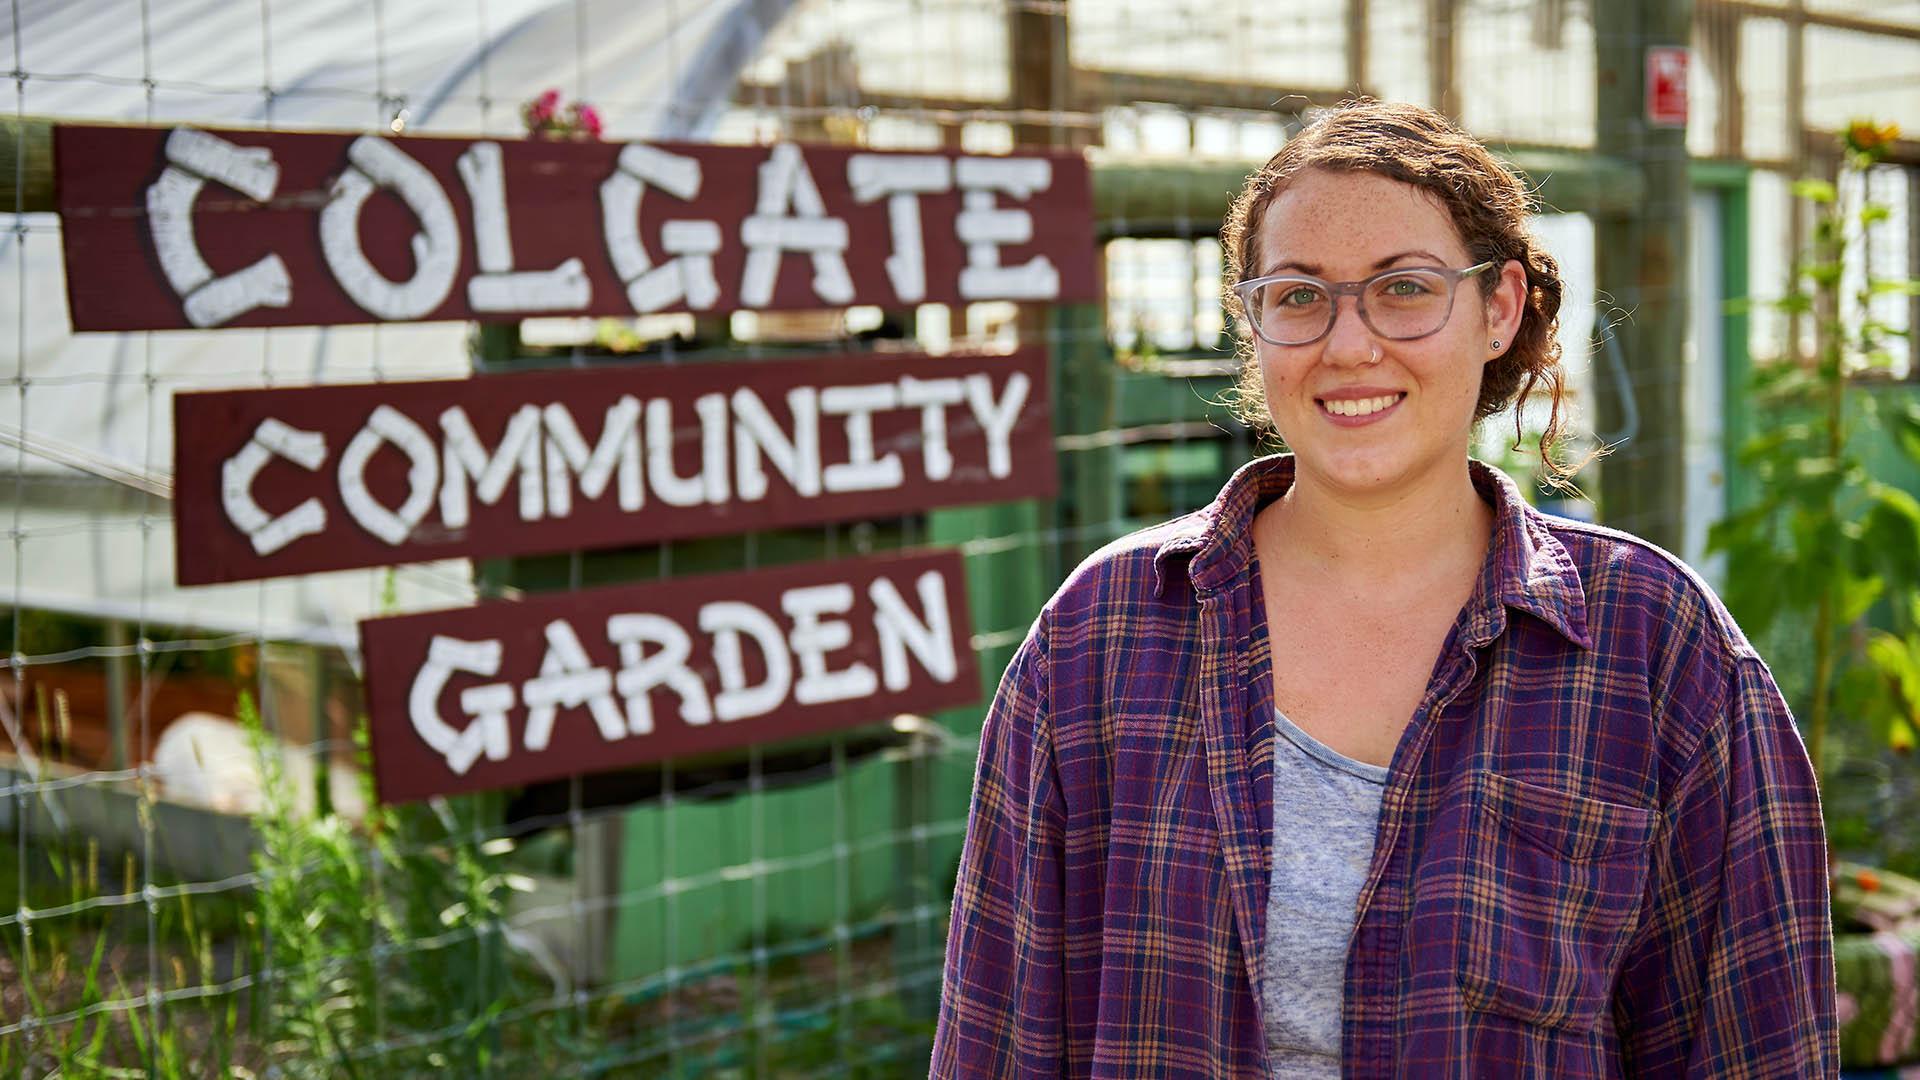 Grace Littlefield, Colgate Class of 2016, photographed at the Colgate Community Garden, located on Route 12B in Hamilton, N.Y., during one of the monthly summer work parties.